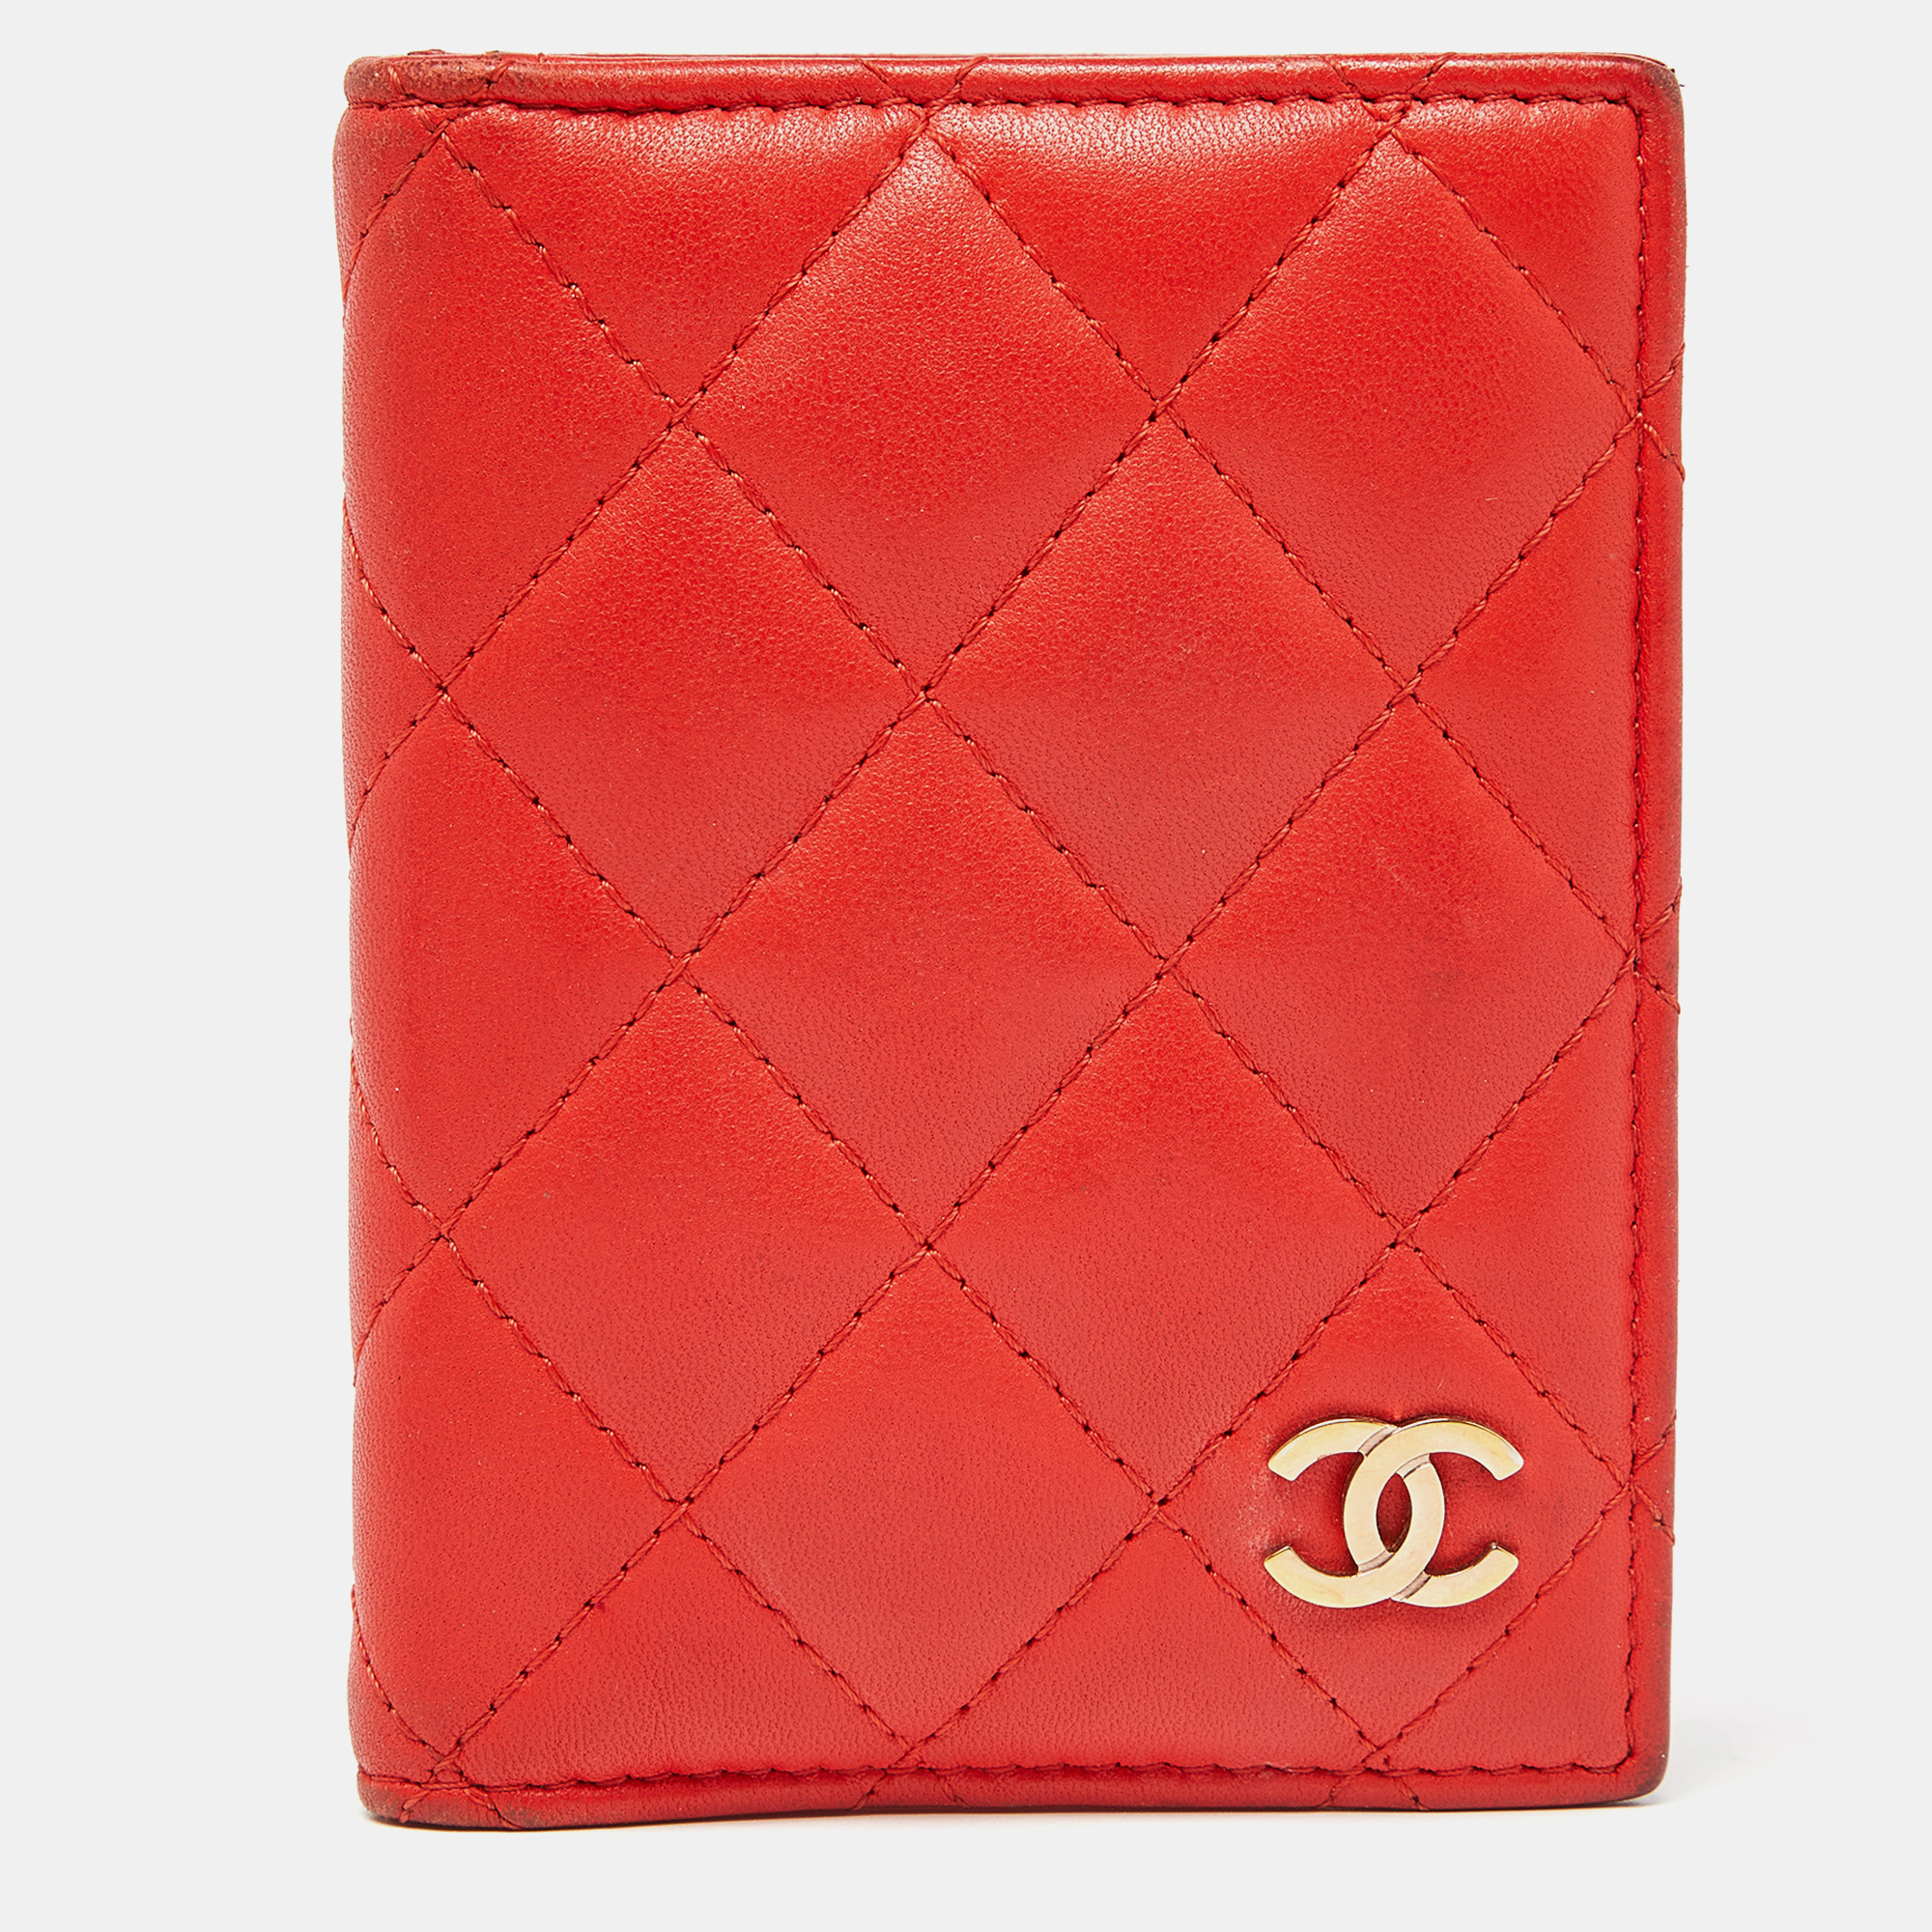 Pre-owned Chanel Orange Quilted Leather Cc Logo Card Case